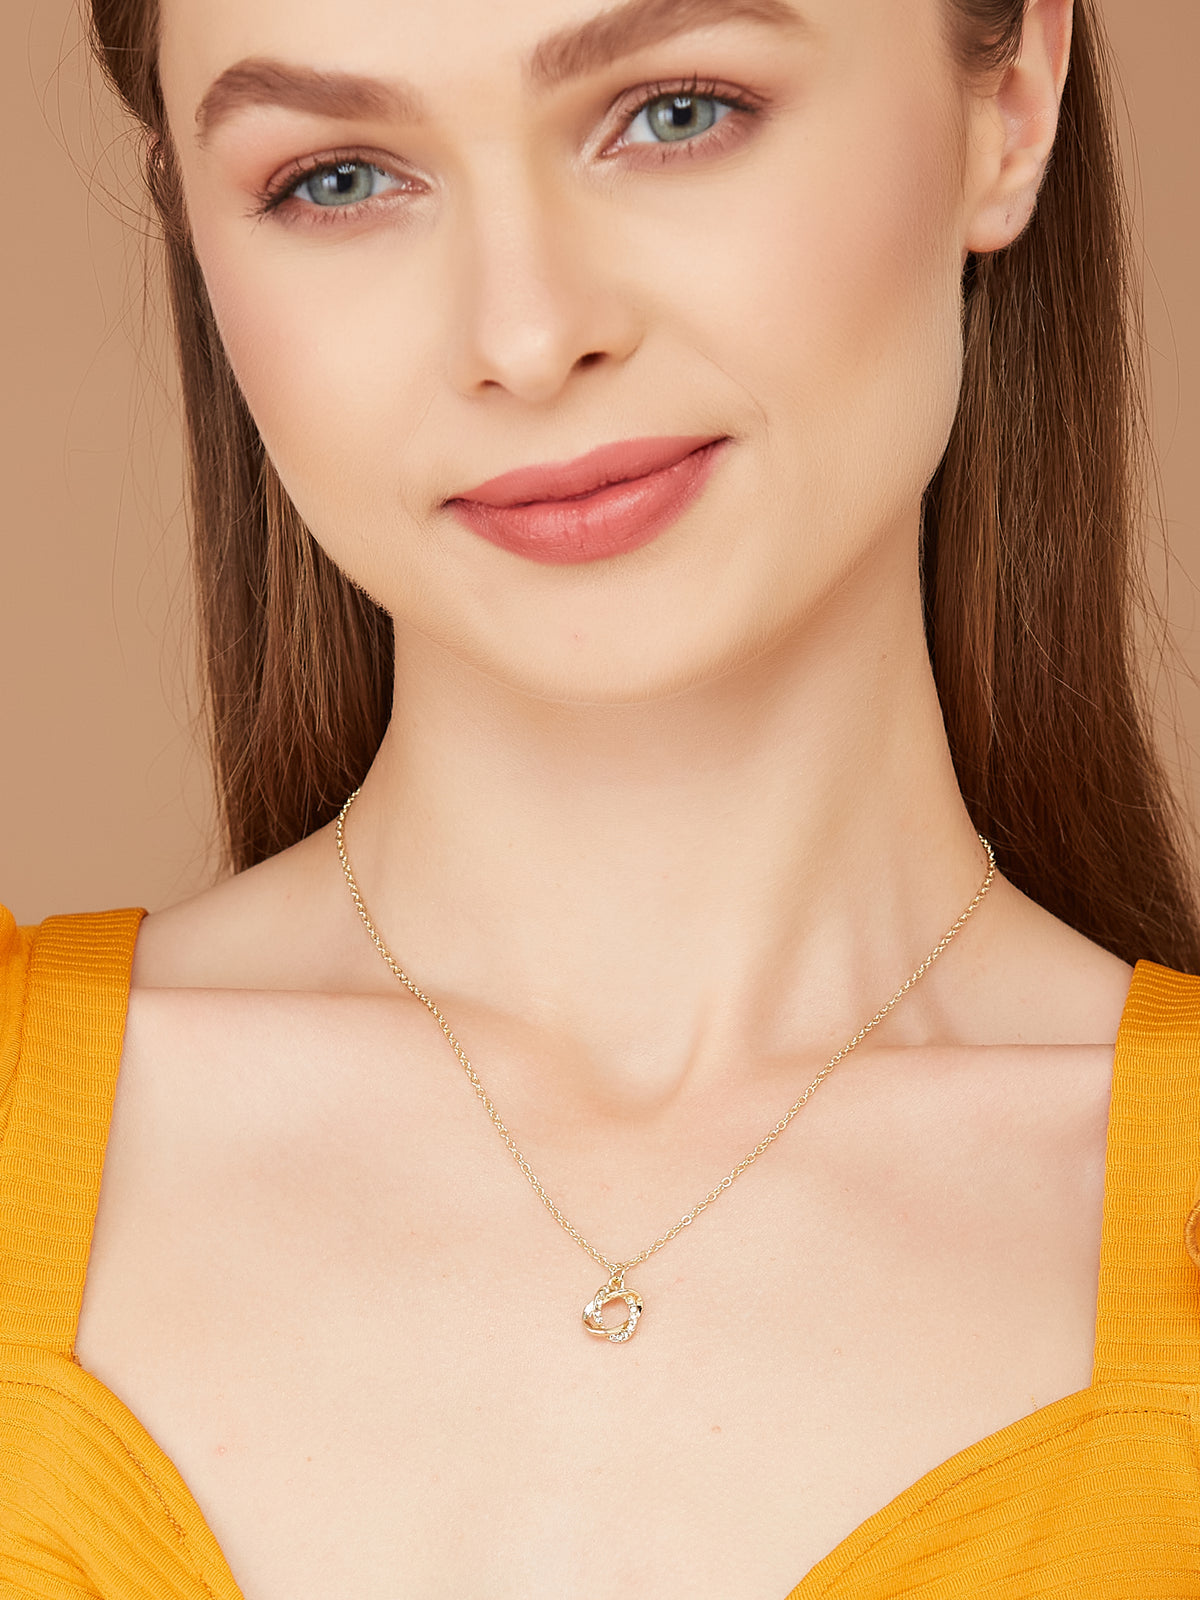 Gold Plated Chain with Pendant for women & girls